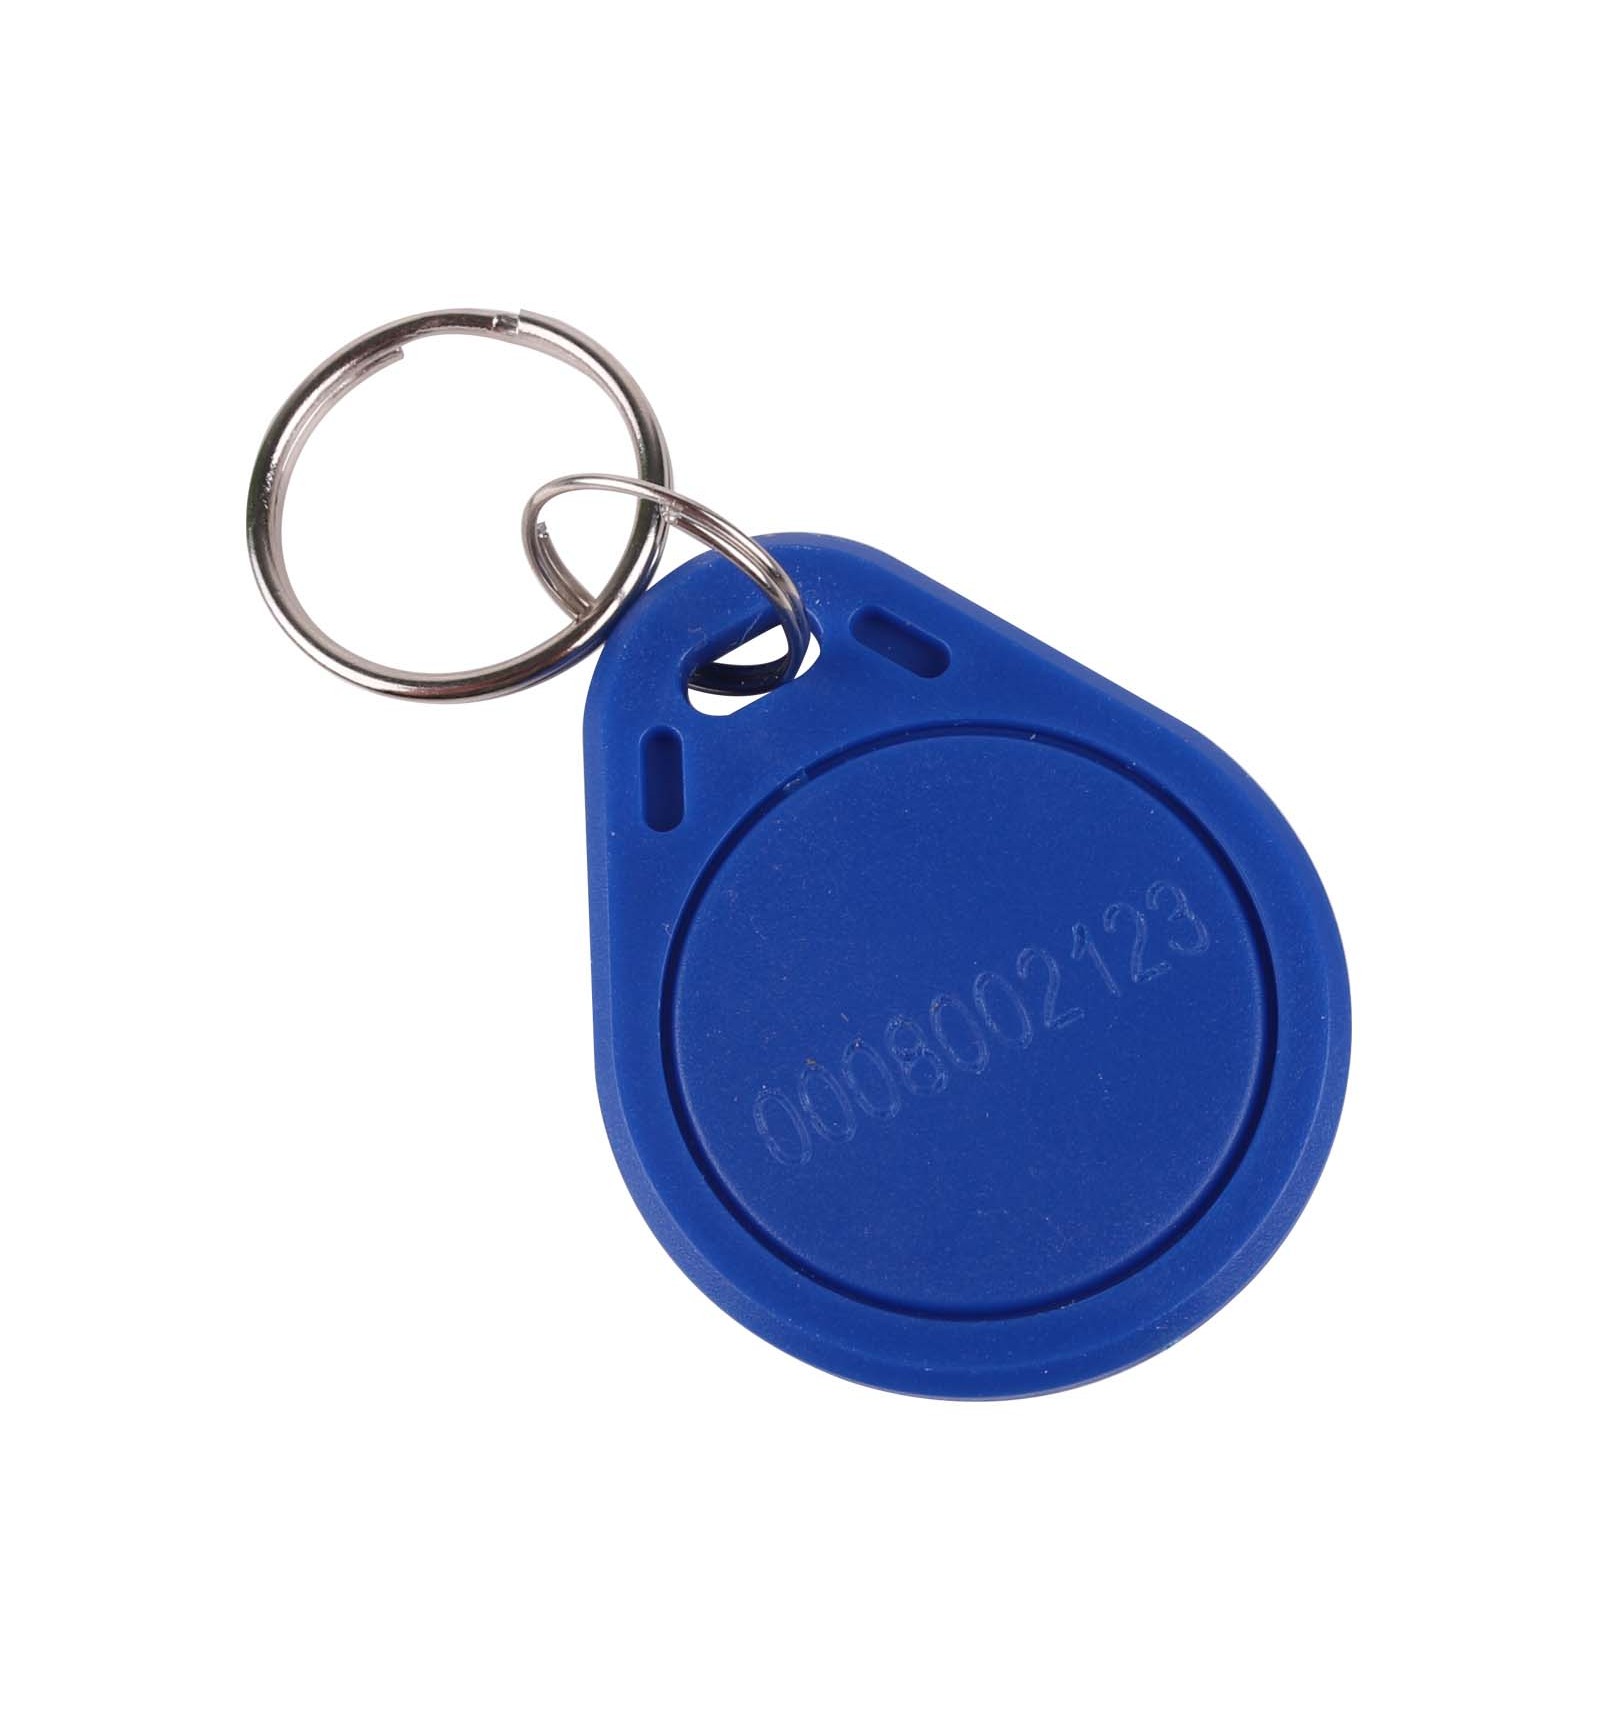 Ascensor canal marxista RFID Tag 125kHz | Read-Only Location Tracking RFID Tokens